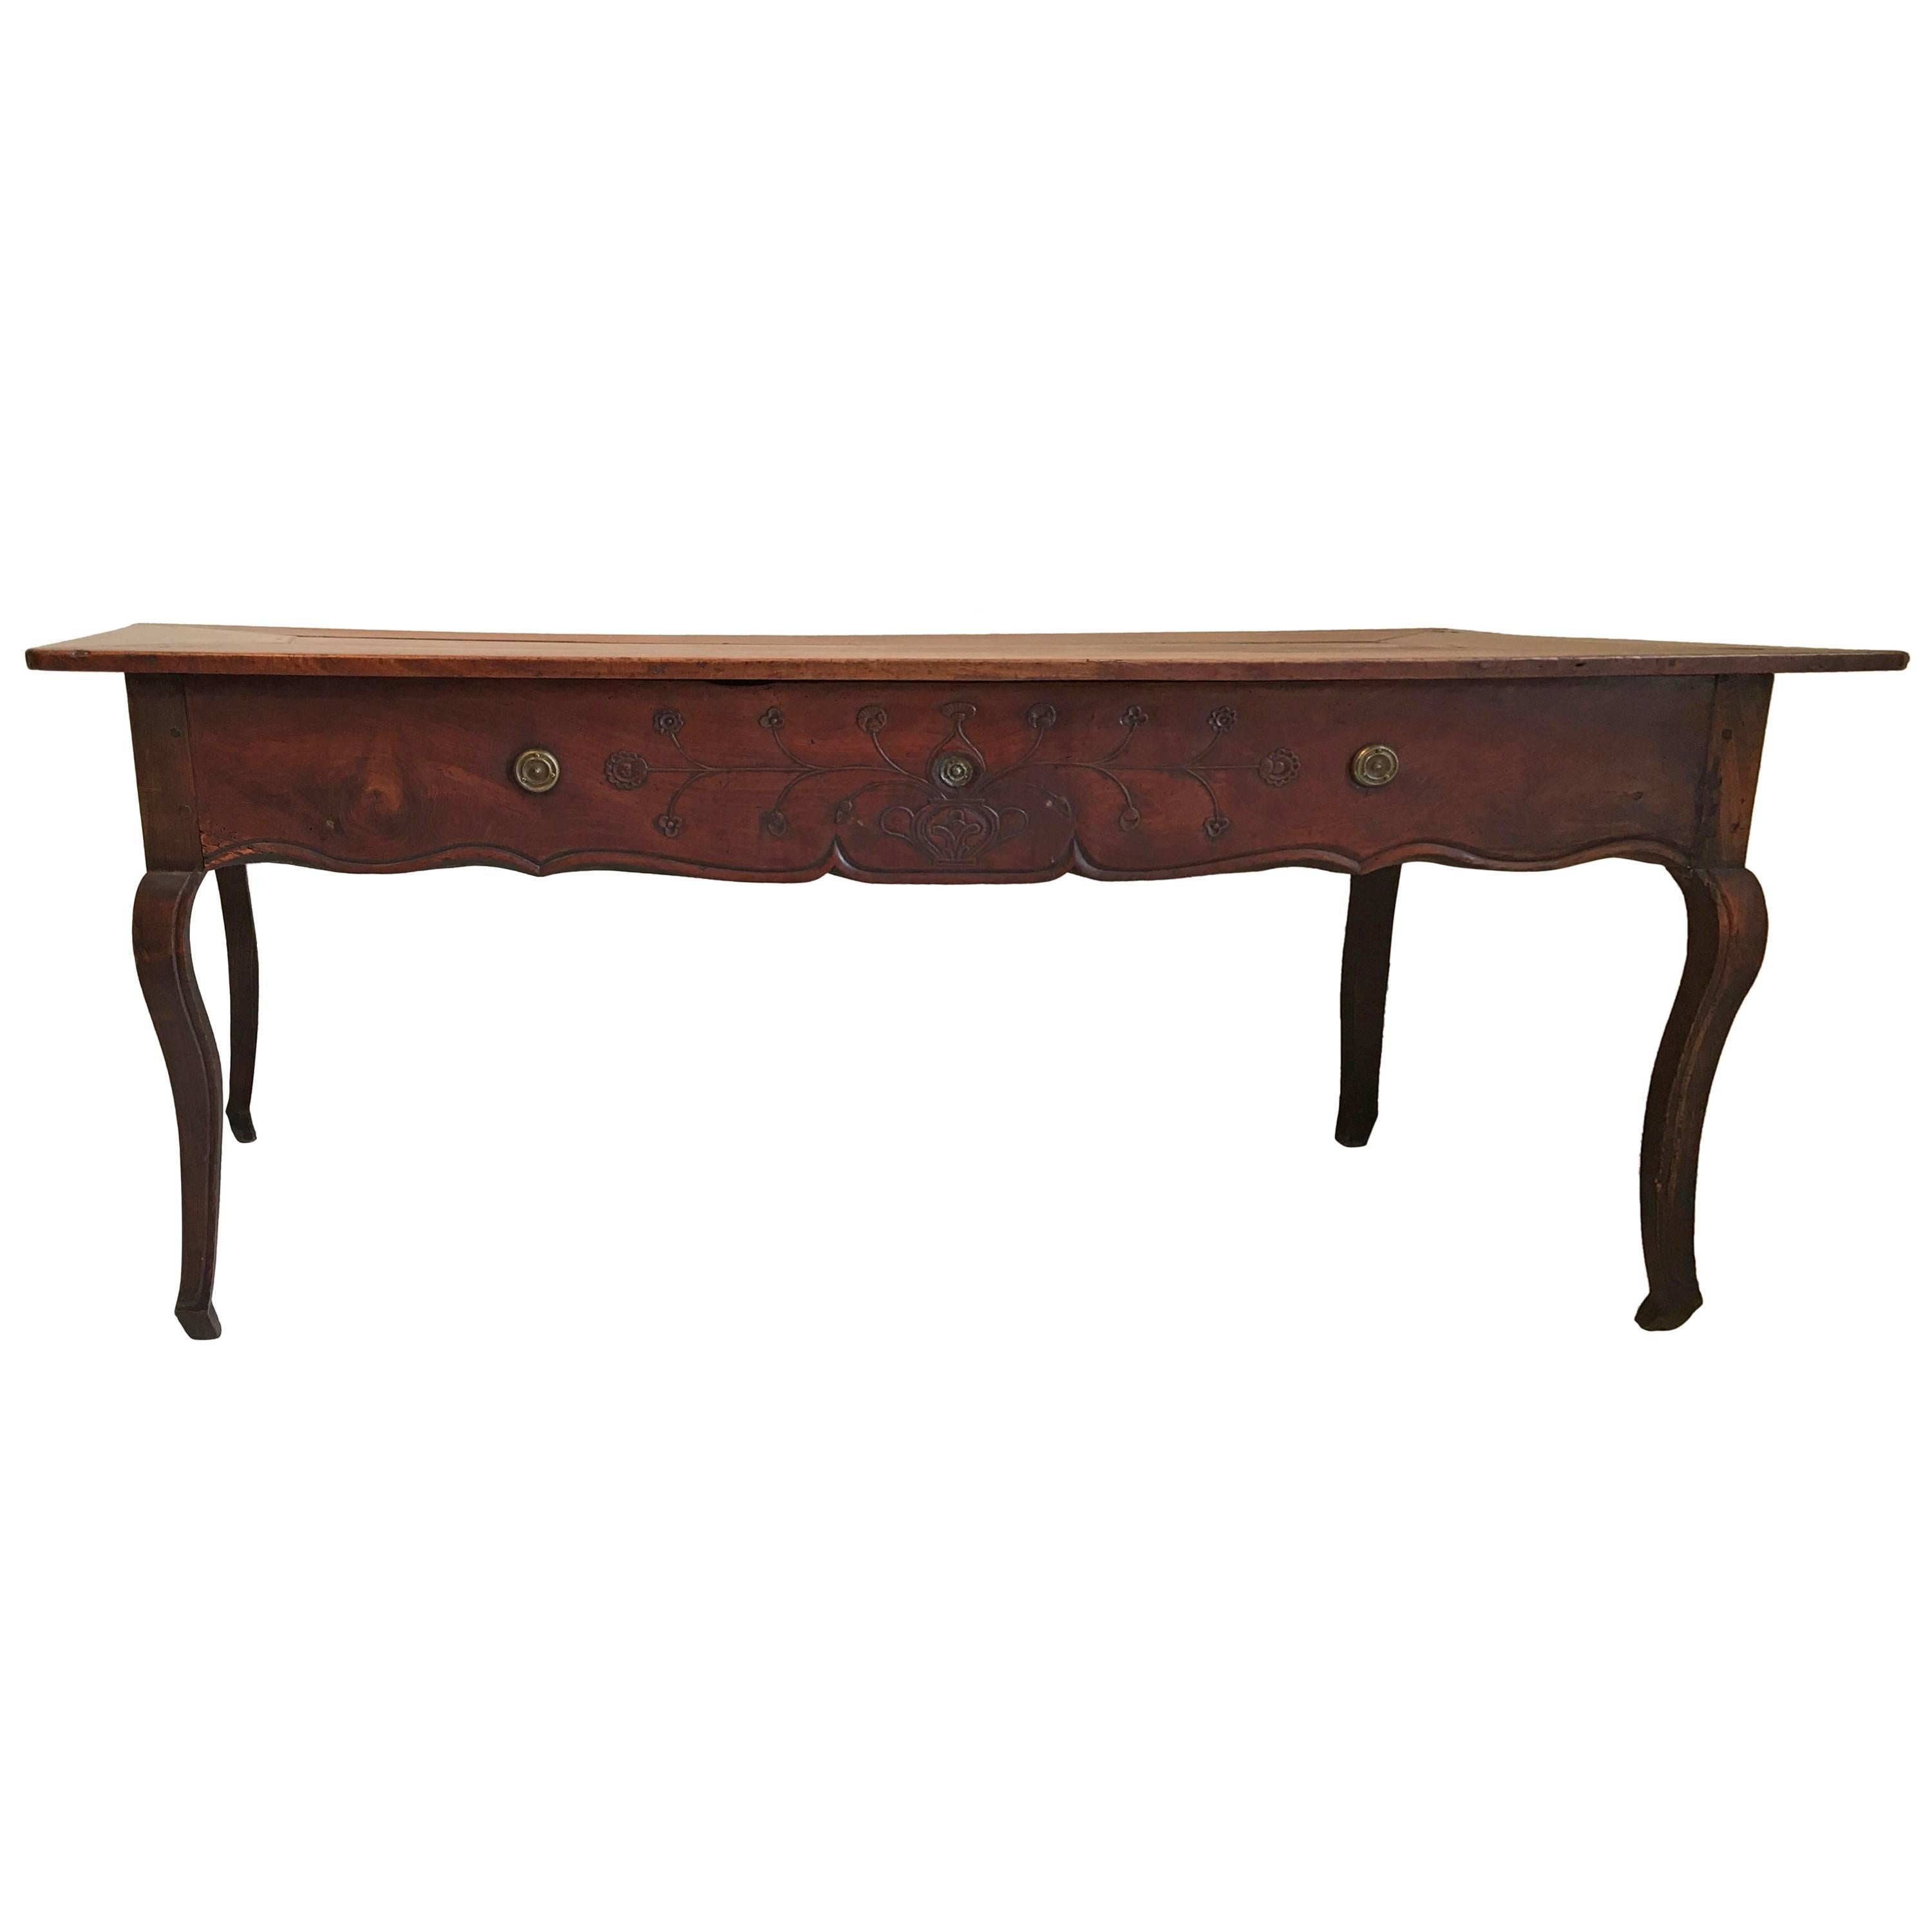 Large French Country Style Walnut Desk or Table, 18th Century